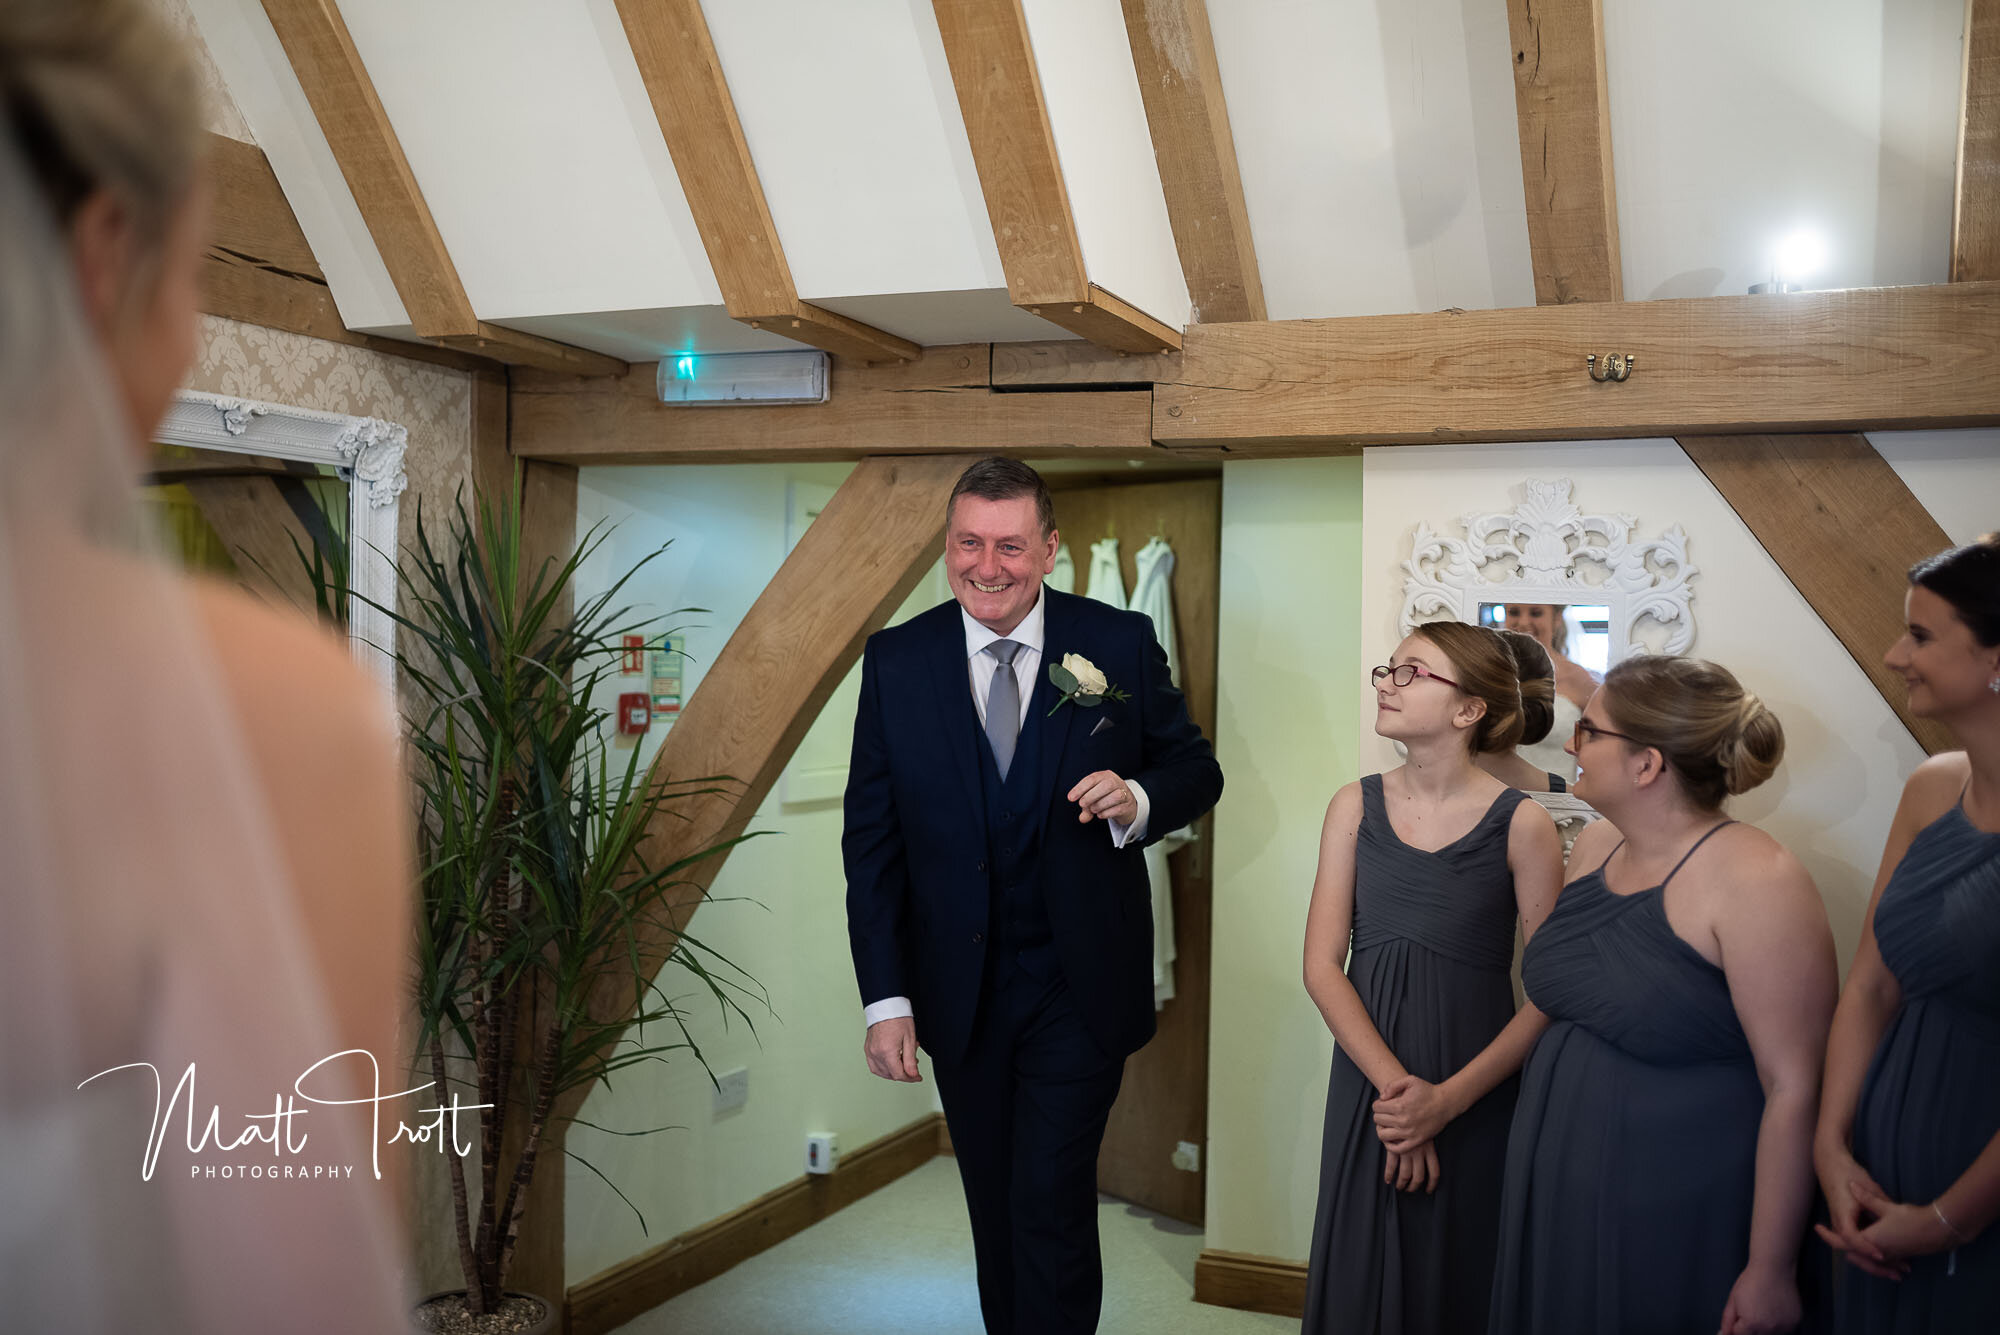 Dad seeing daughter all dressed up in her wedding dress at the Old kent Barn